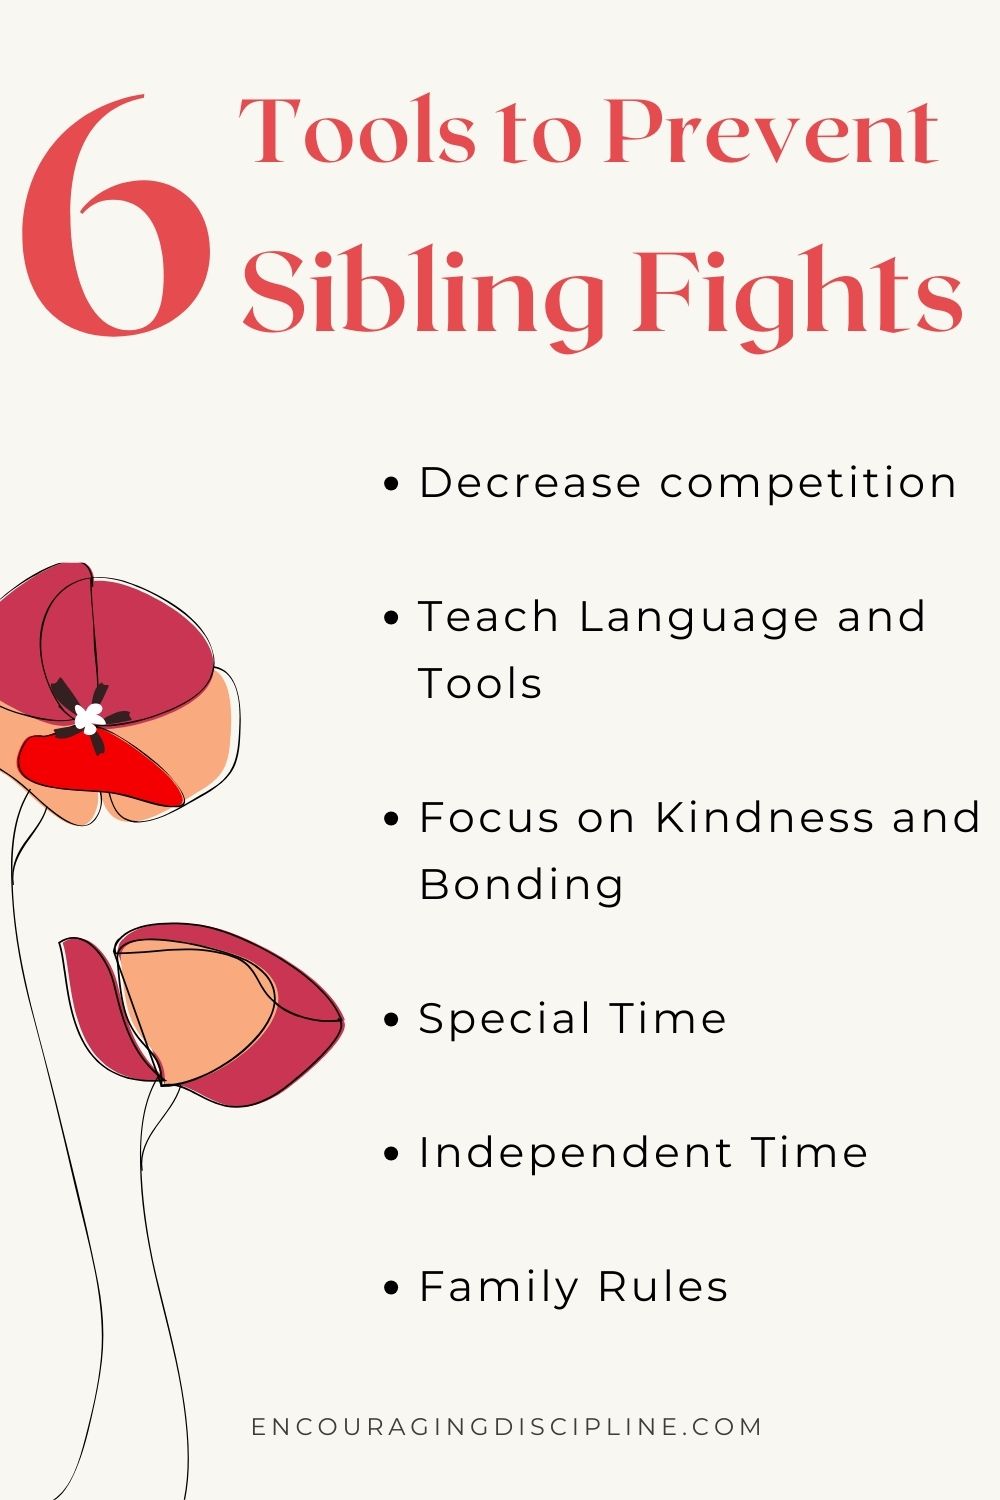 Tools to Prevent Sibling Fights